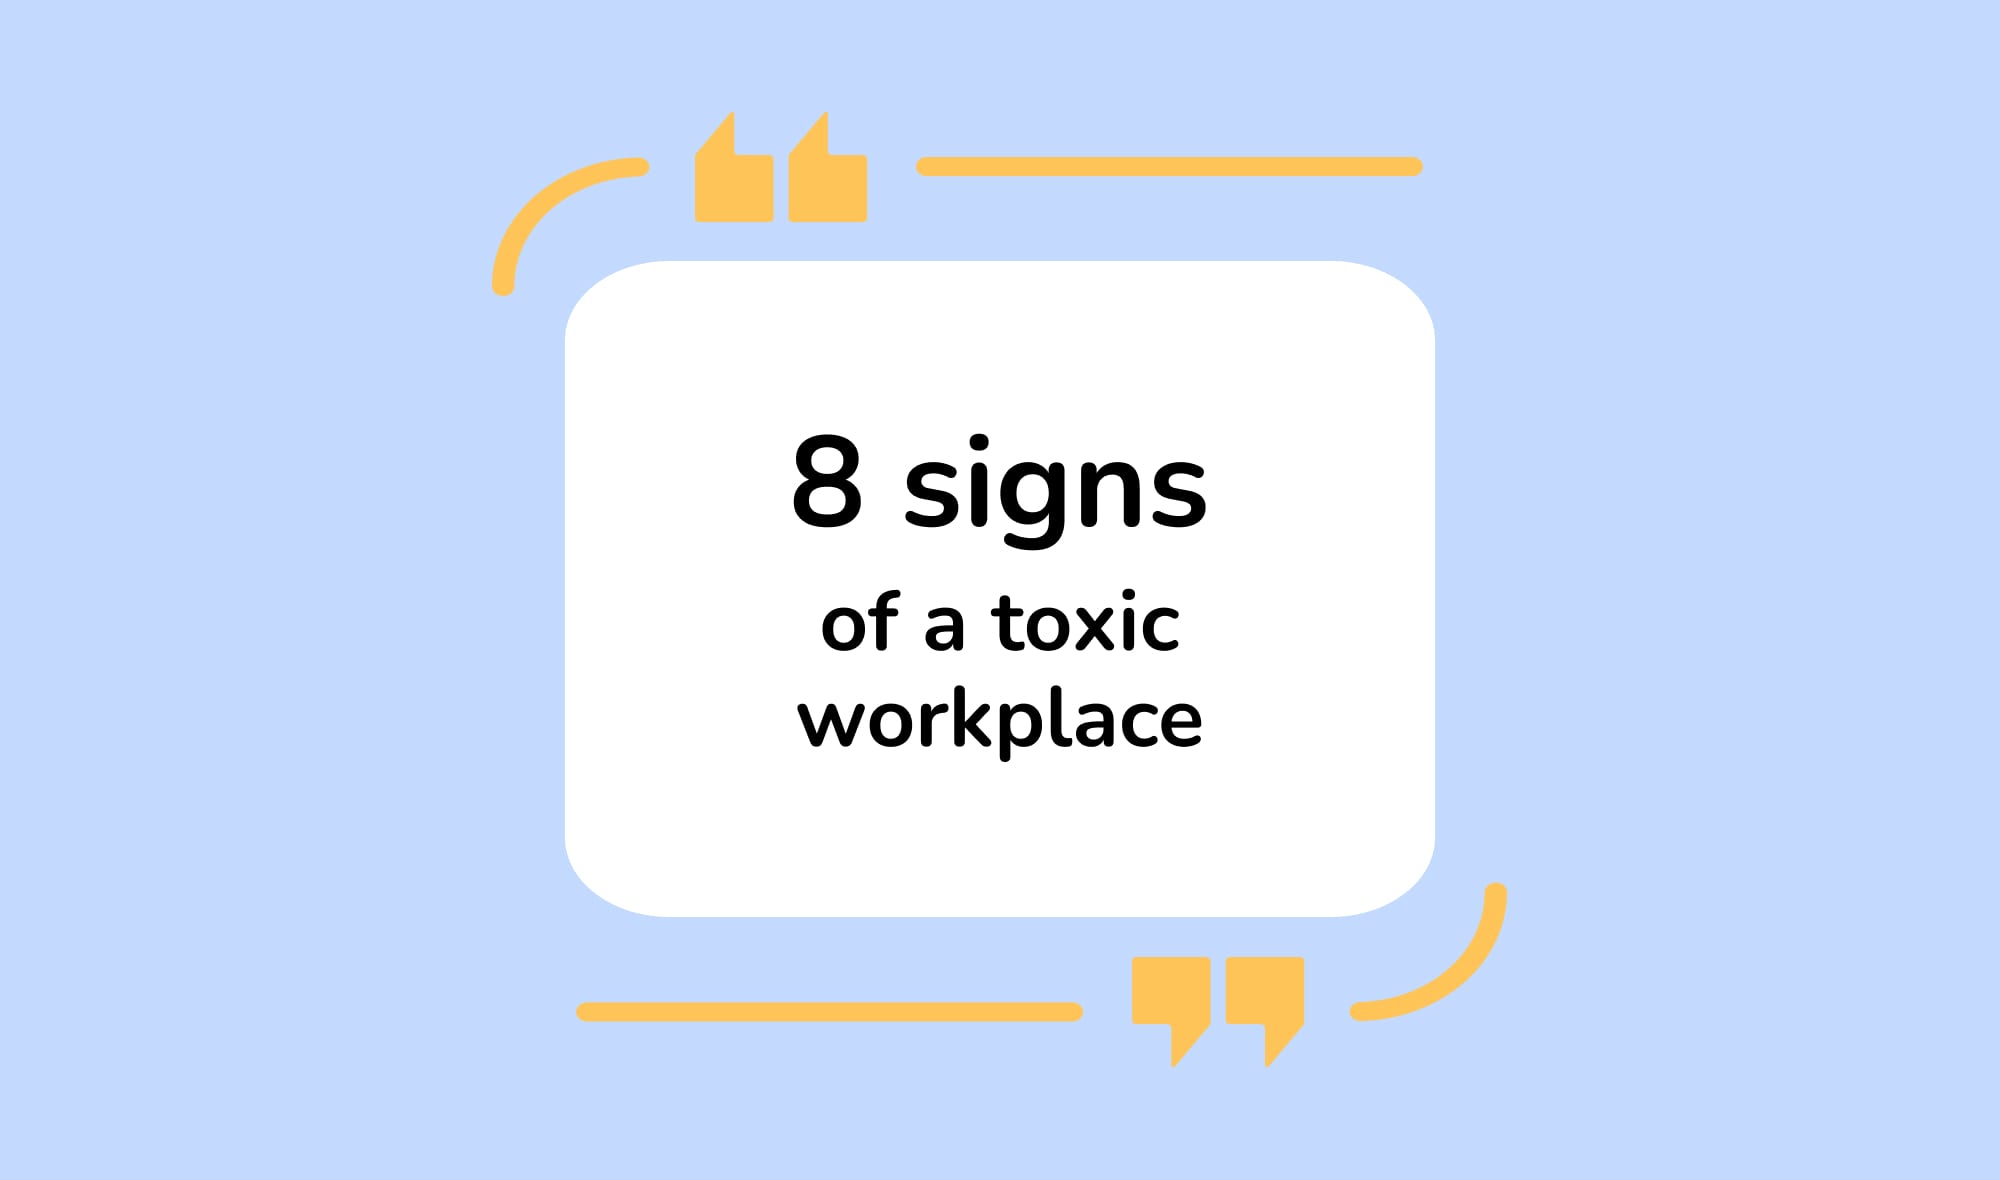 8 signs of a toxic workplace